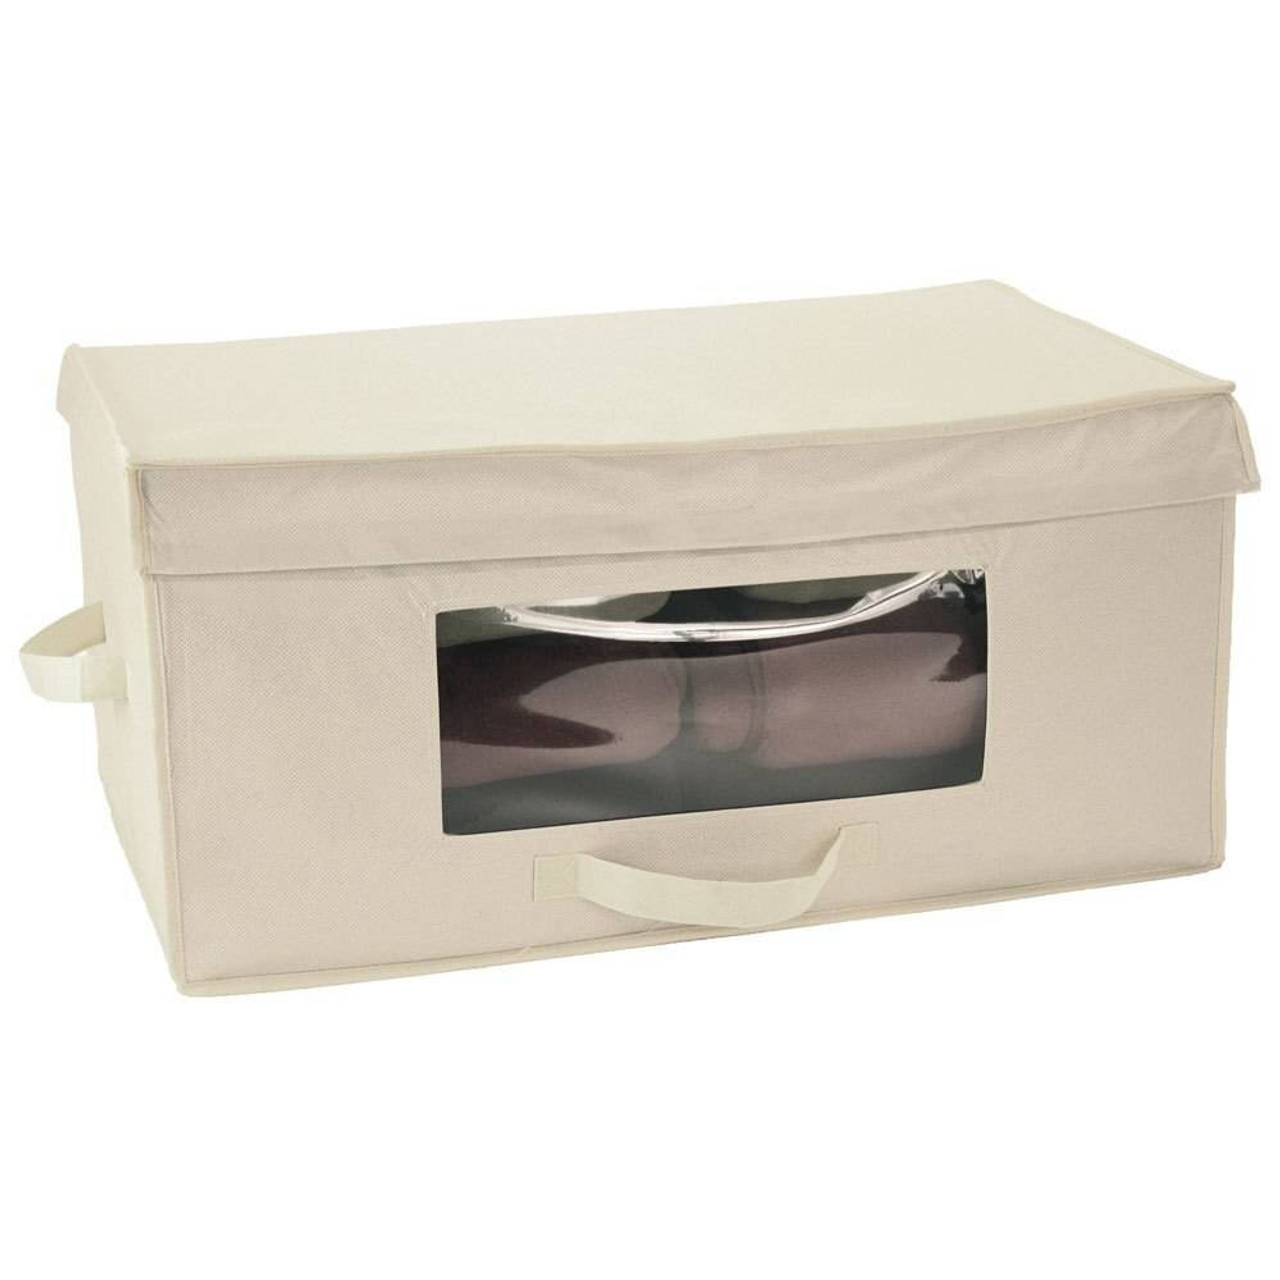 HOSPITALITY 1 SOURCE HOSPITALITY 1 SOURCE or NON-WOVEN or BLANKET BOX or IVORY or 20 PER CASE